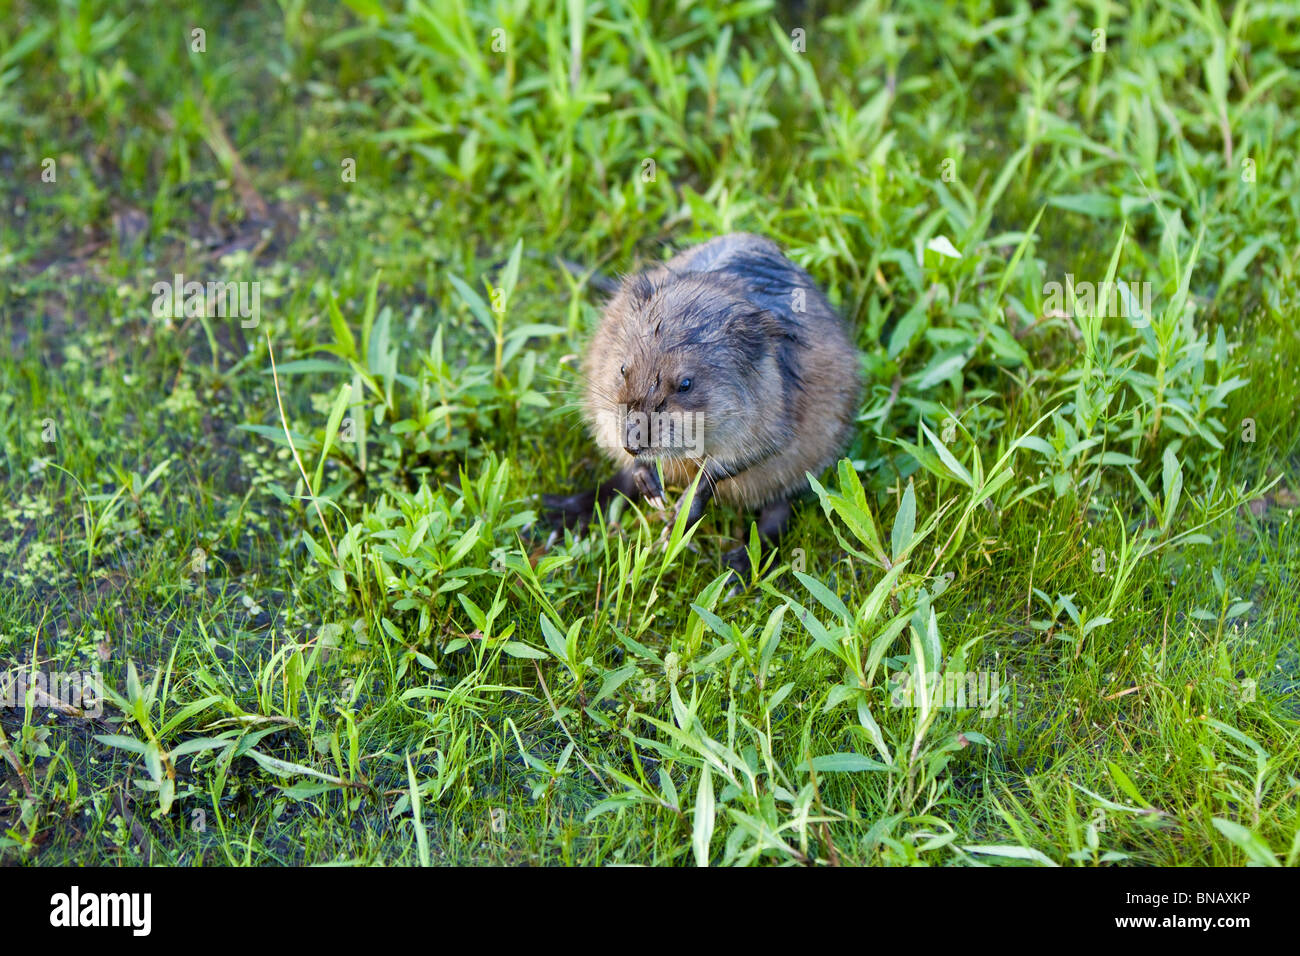 Water vole eating in a marsh. Stock Photo